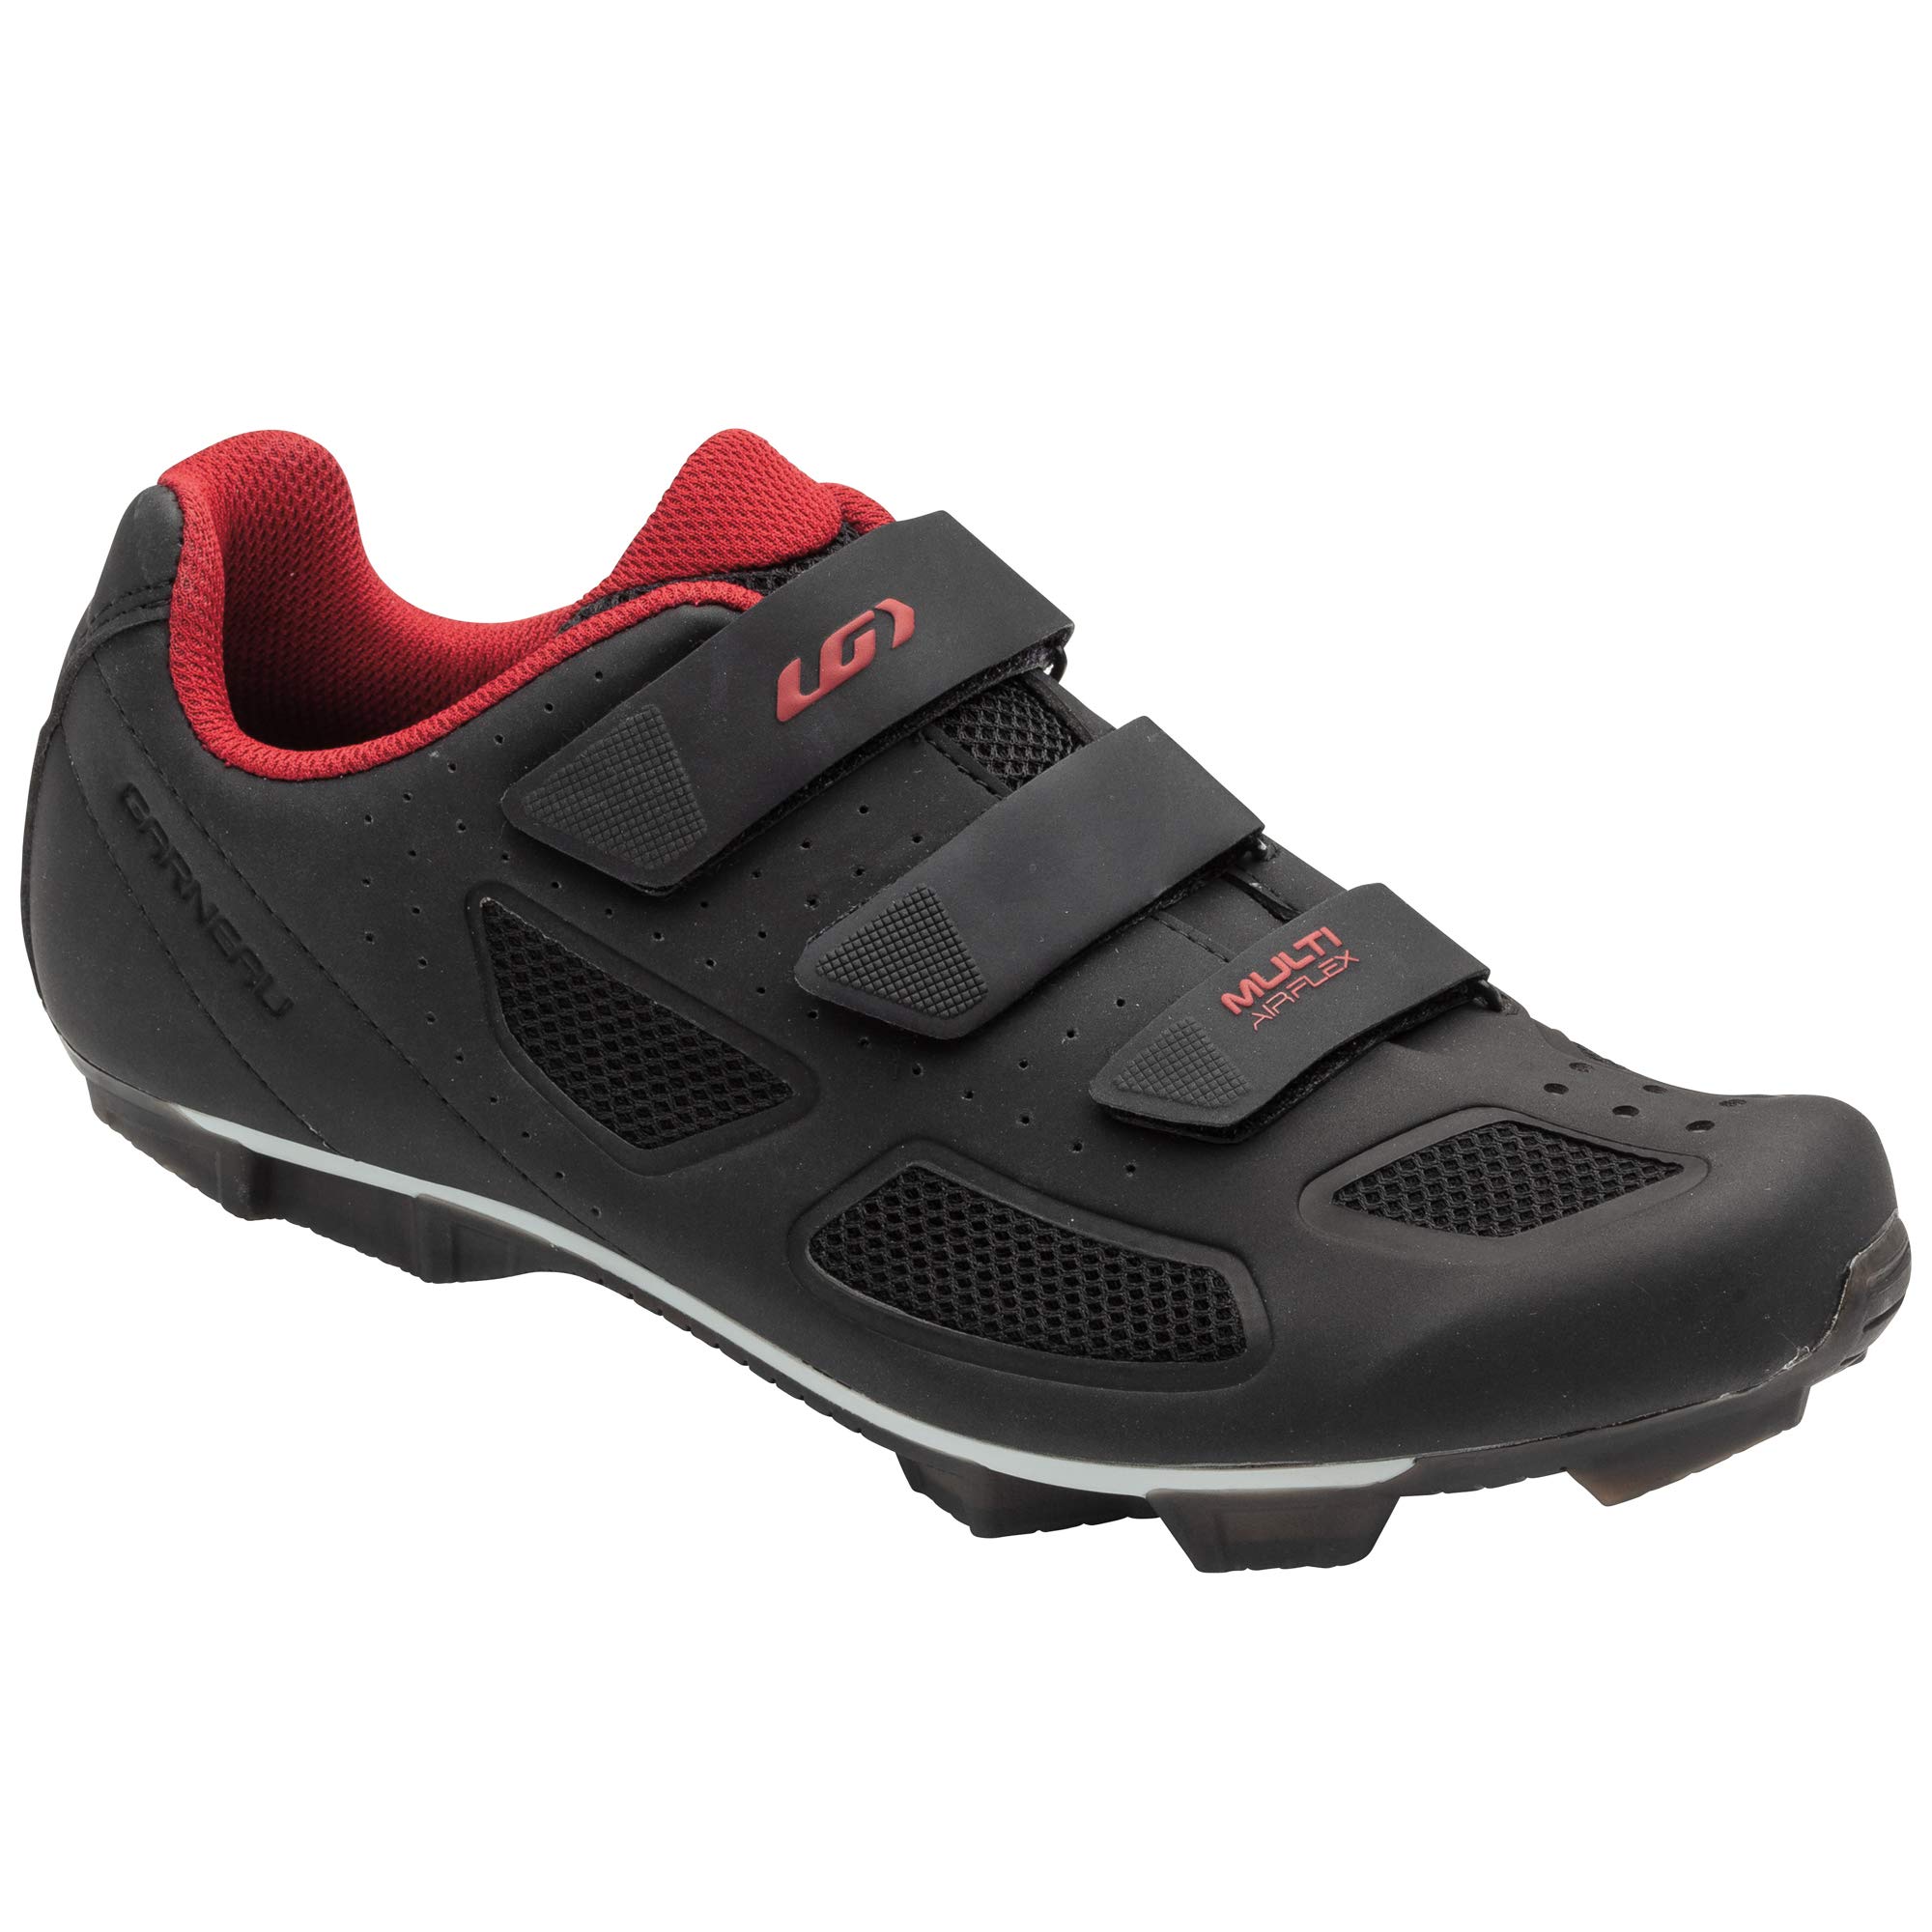 Louis Garneau, Men's Multi Air Flex II Bike Shoes for Commuting, MTB and Indoor Cycling, SPD Cleats Compatible with MTB Pedals